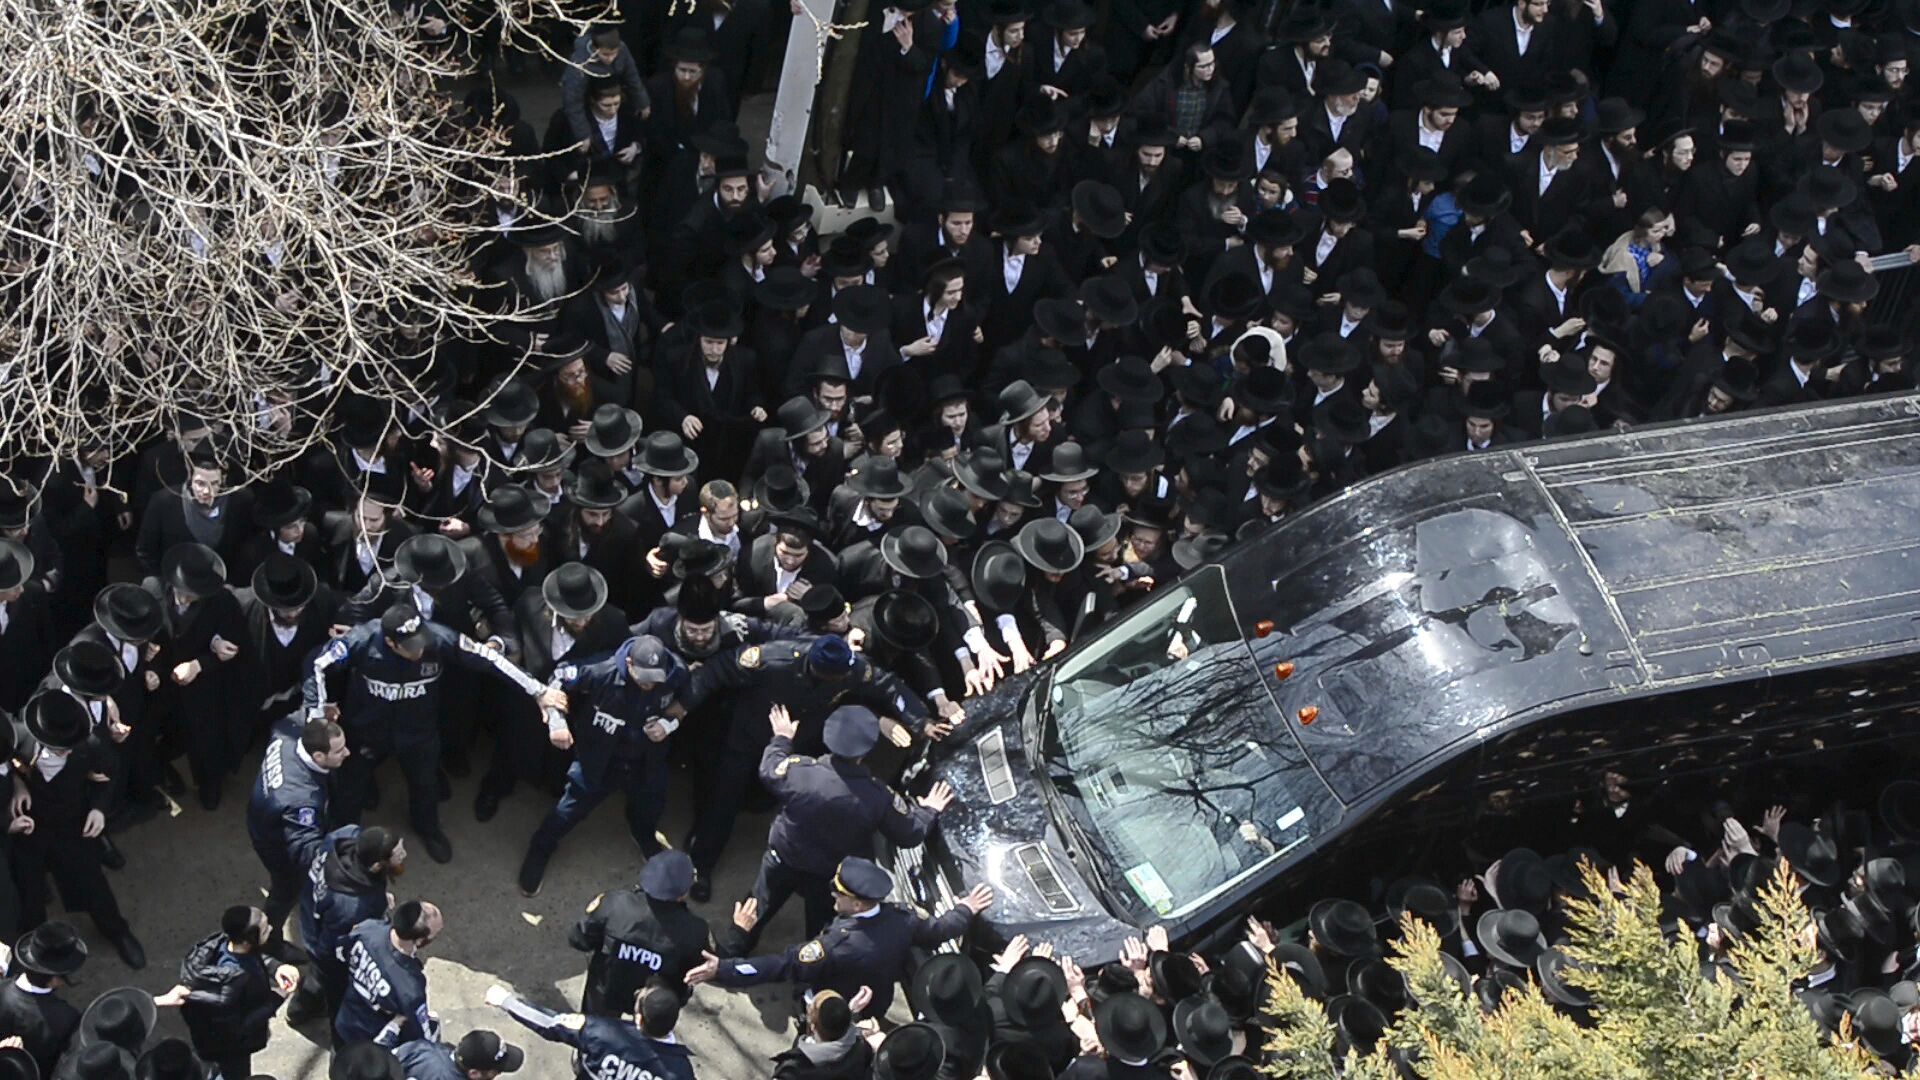 Police Injuries As Thousands Take To Boro Park Streets To Mourn Grand Rabbi